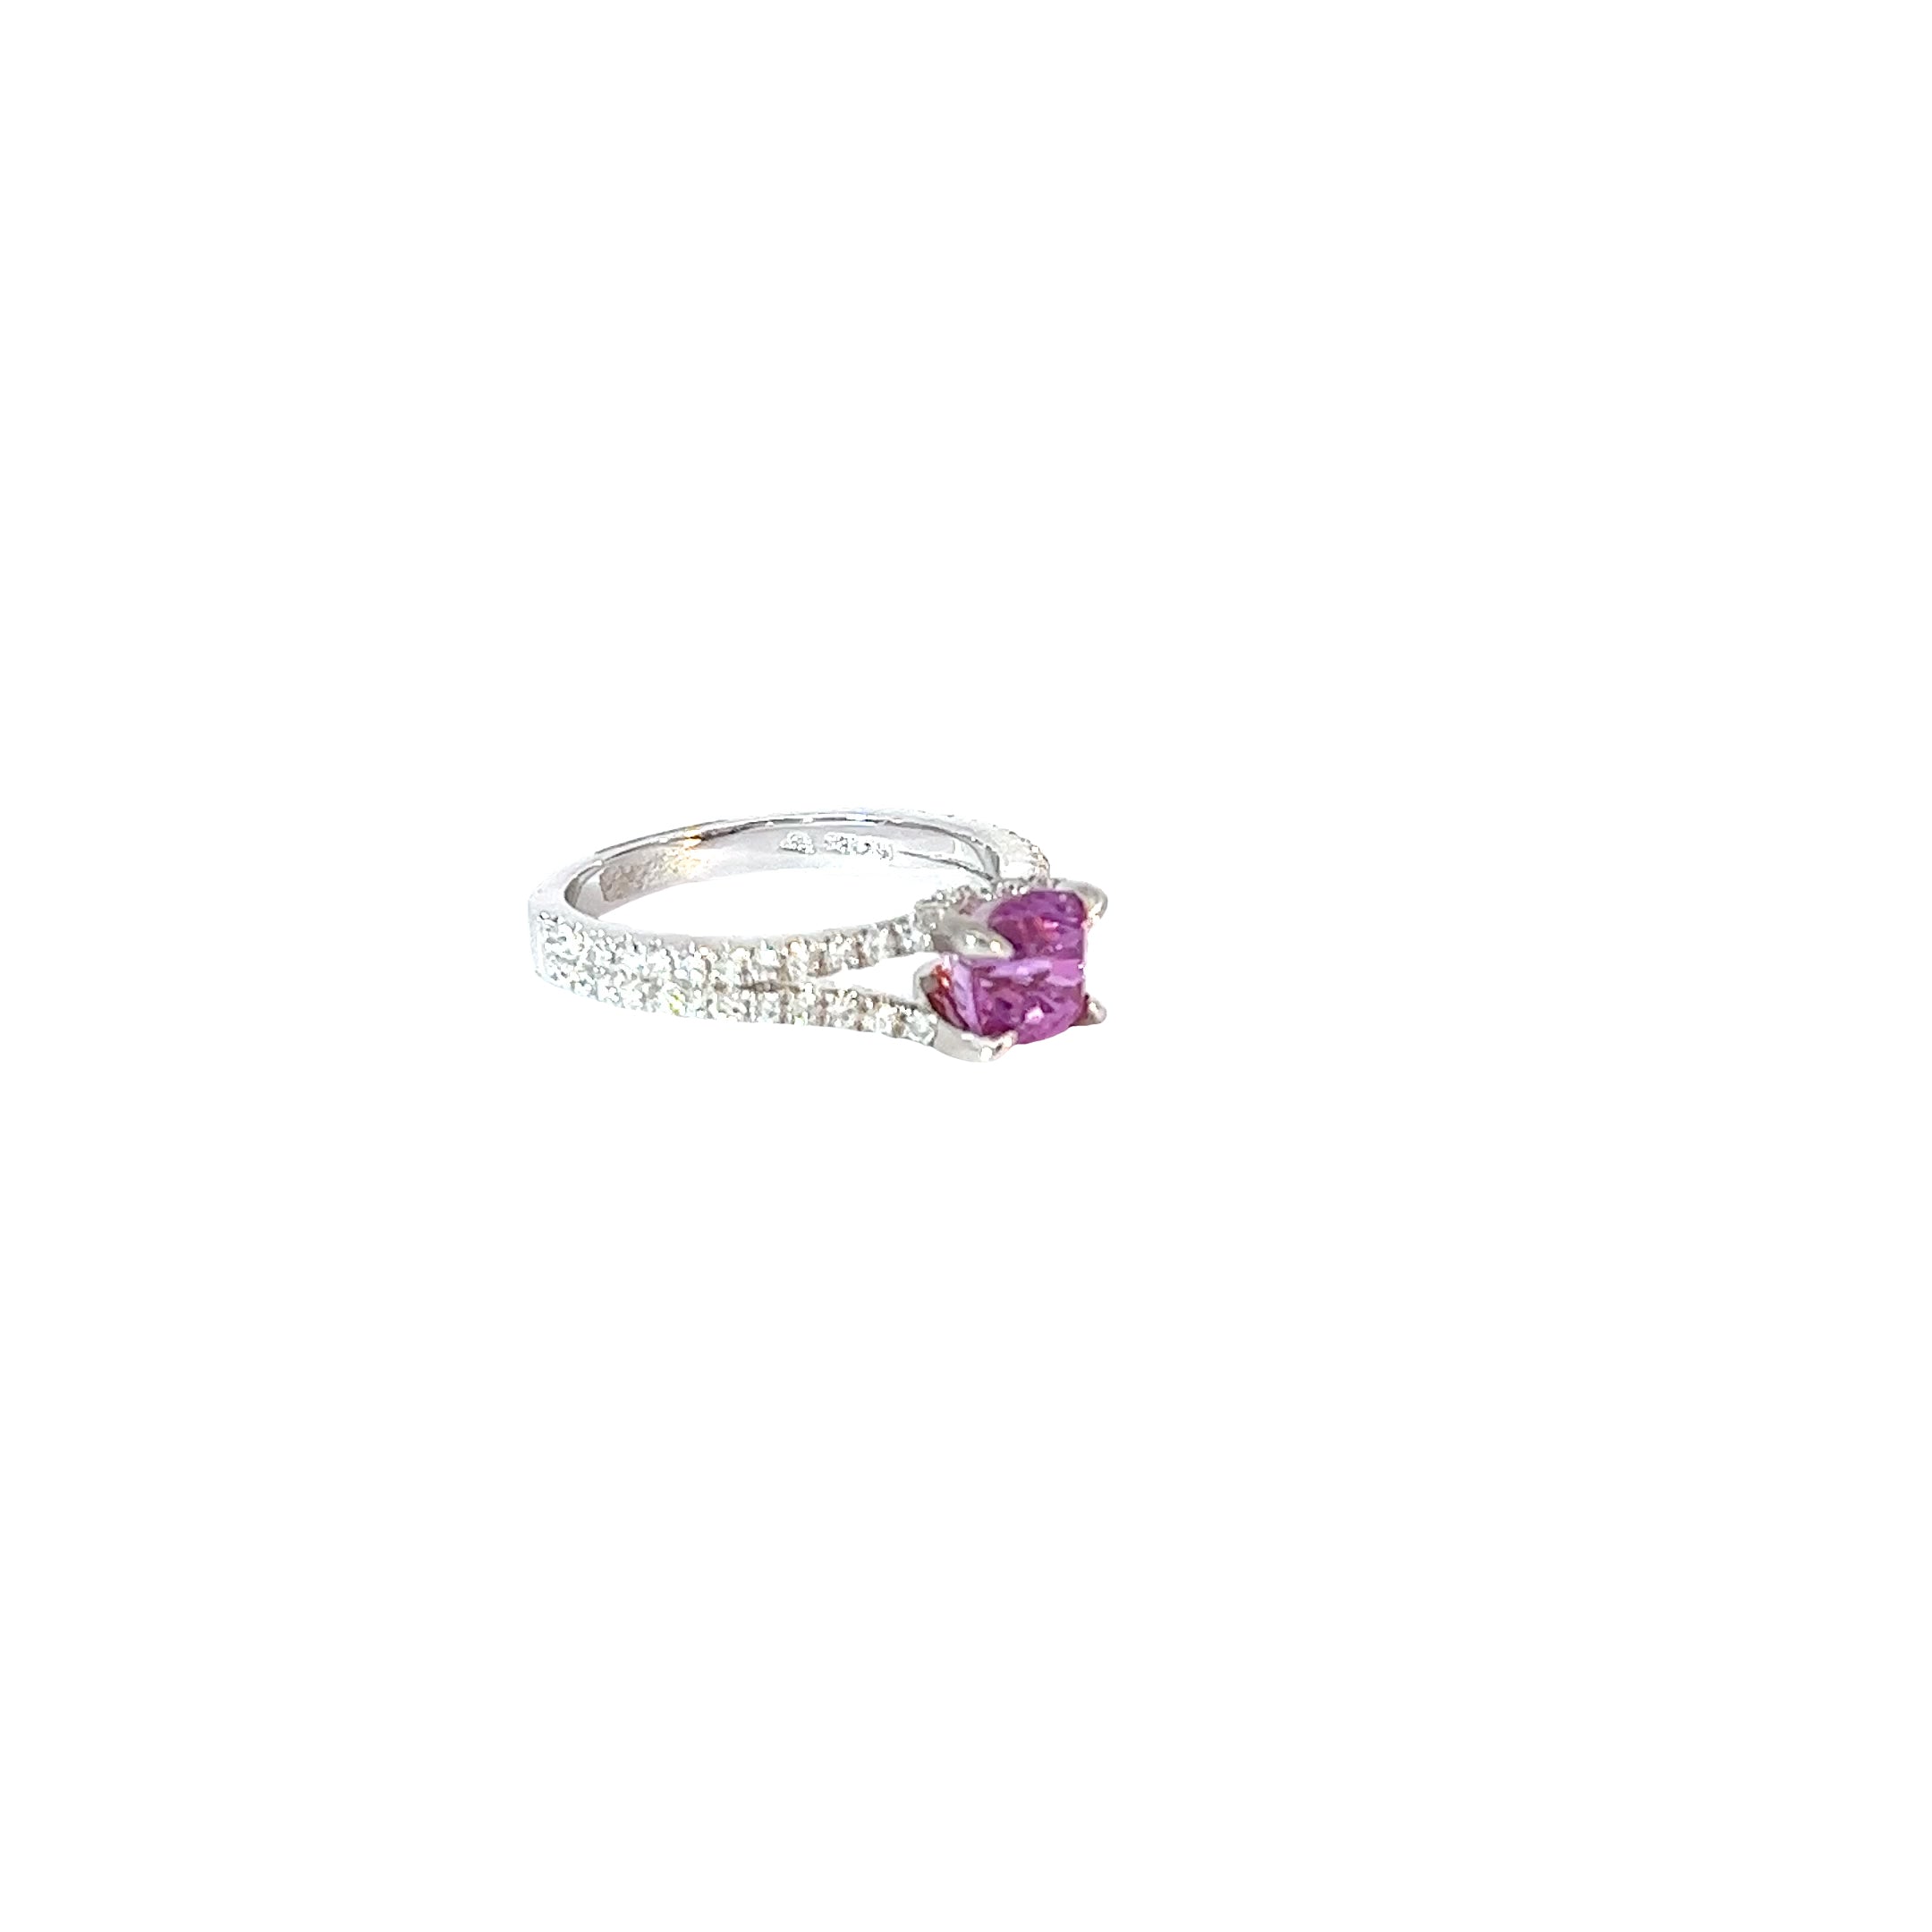 Ladies GIA Certified 14k White Gold Diamond and Pink Sapphire ring